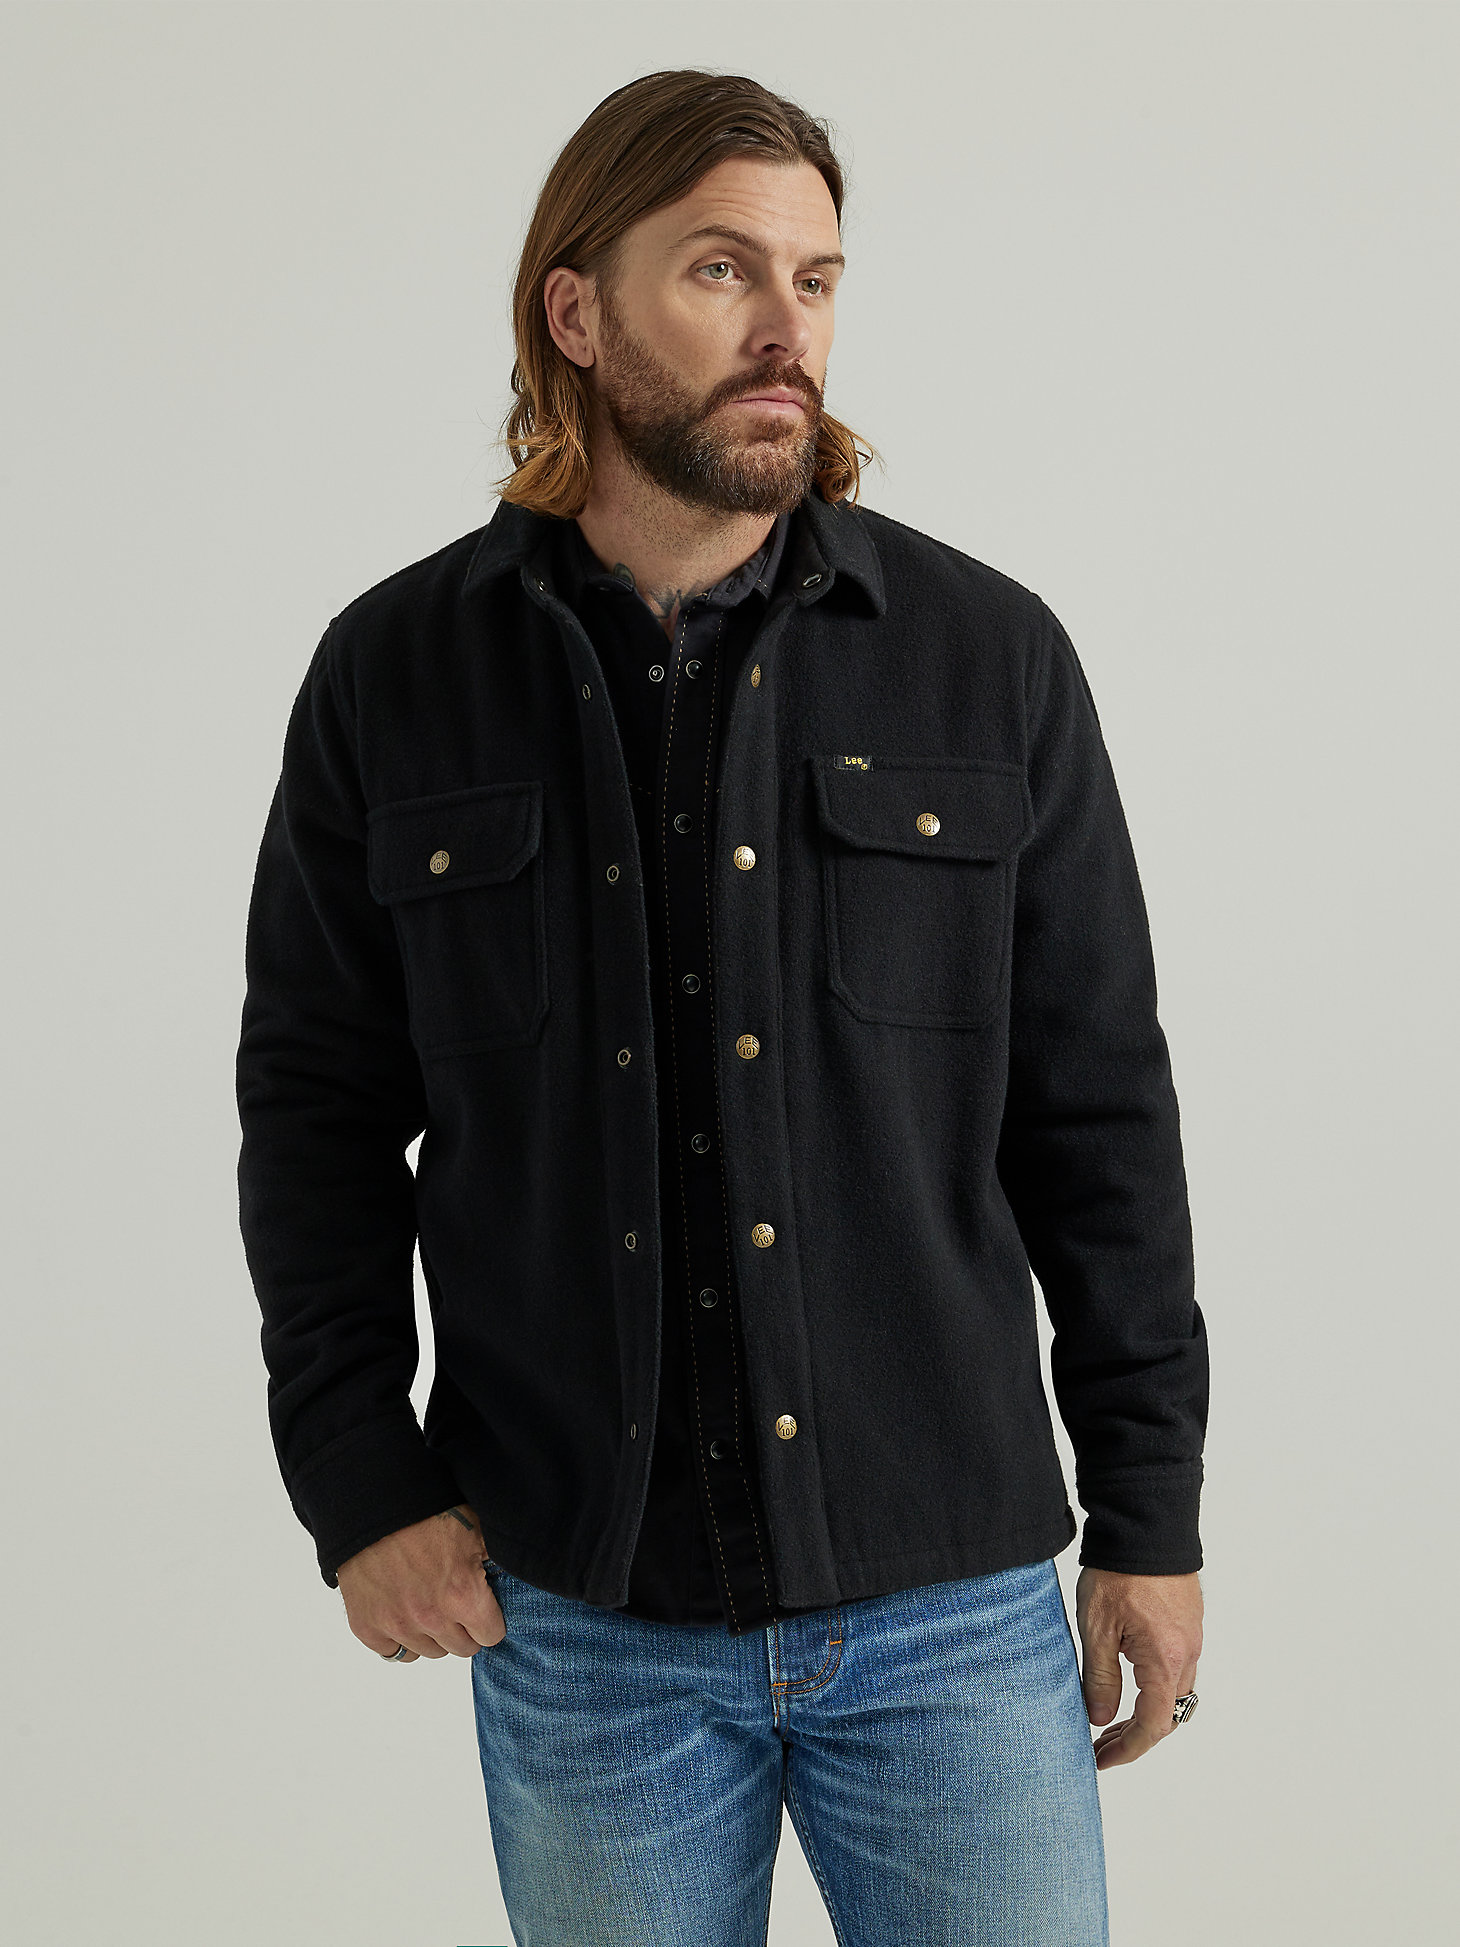 Men's Lee 101 Wool Overshirt in Washed Black main view